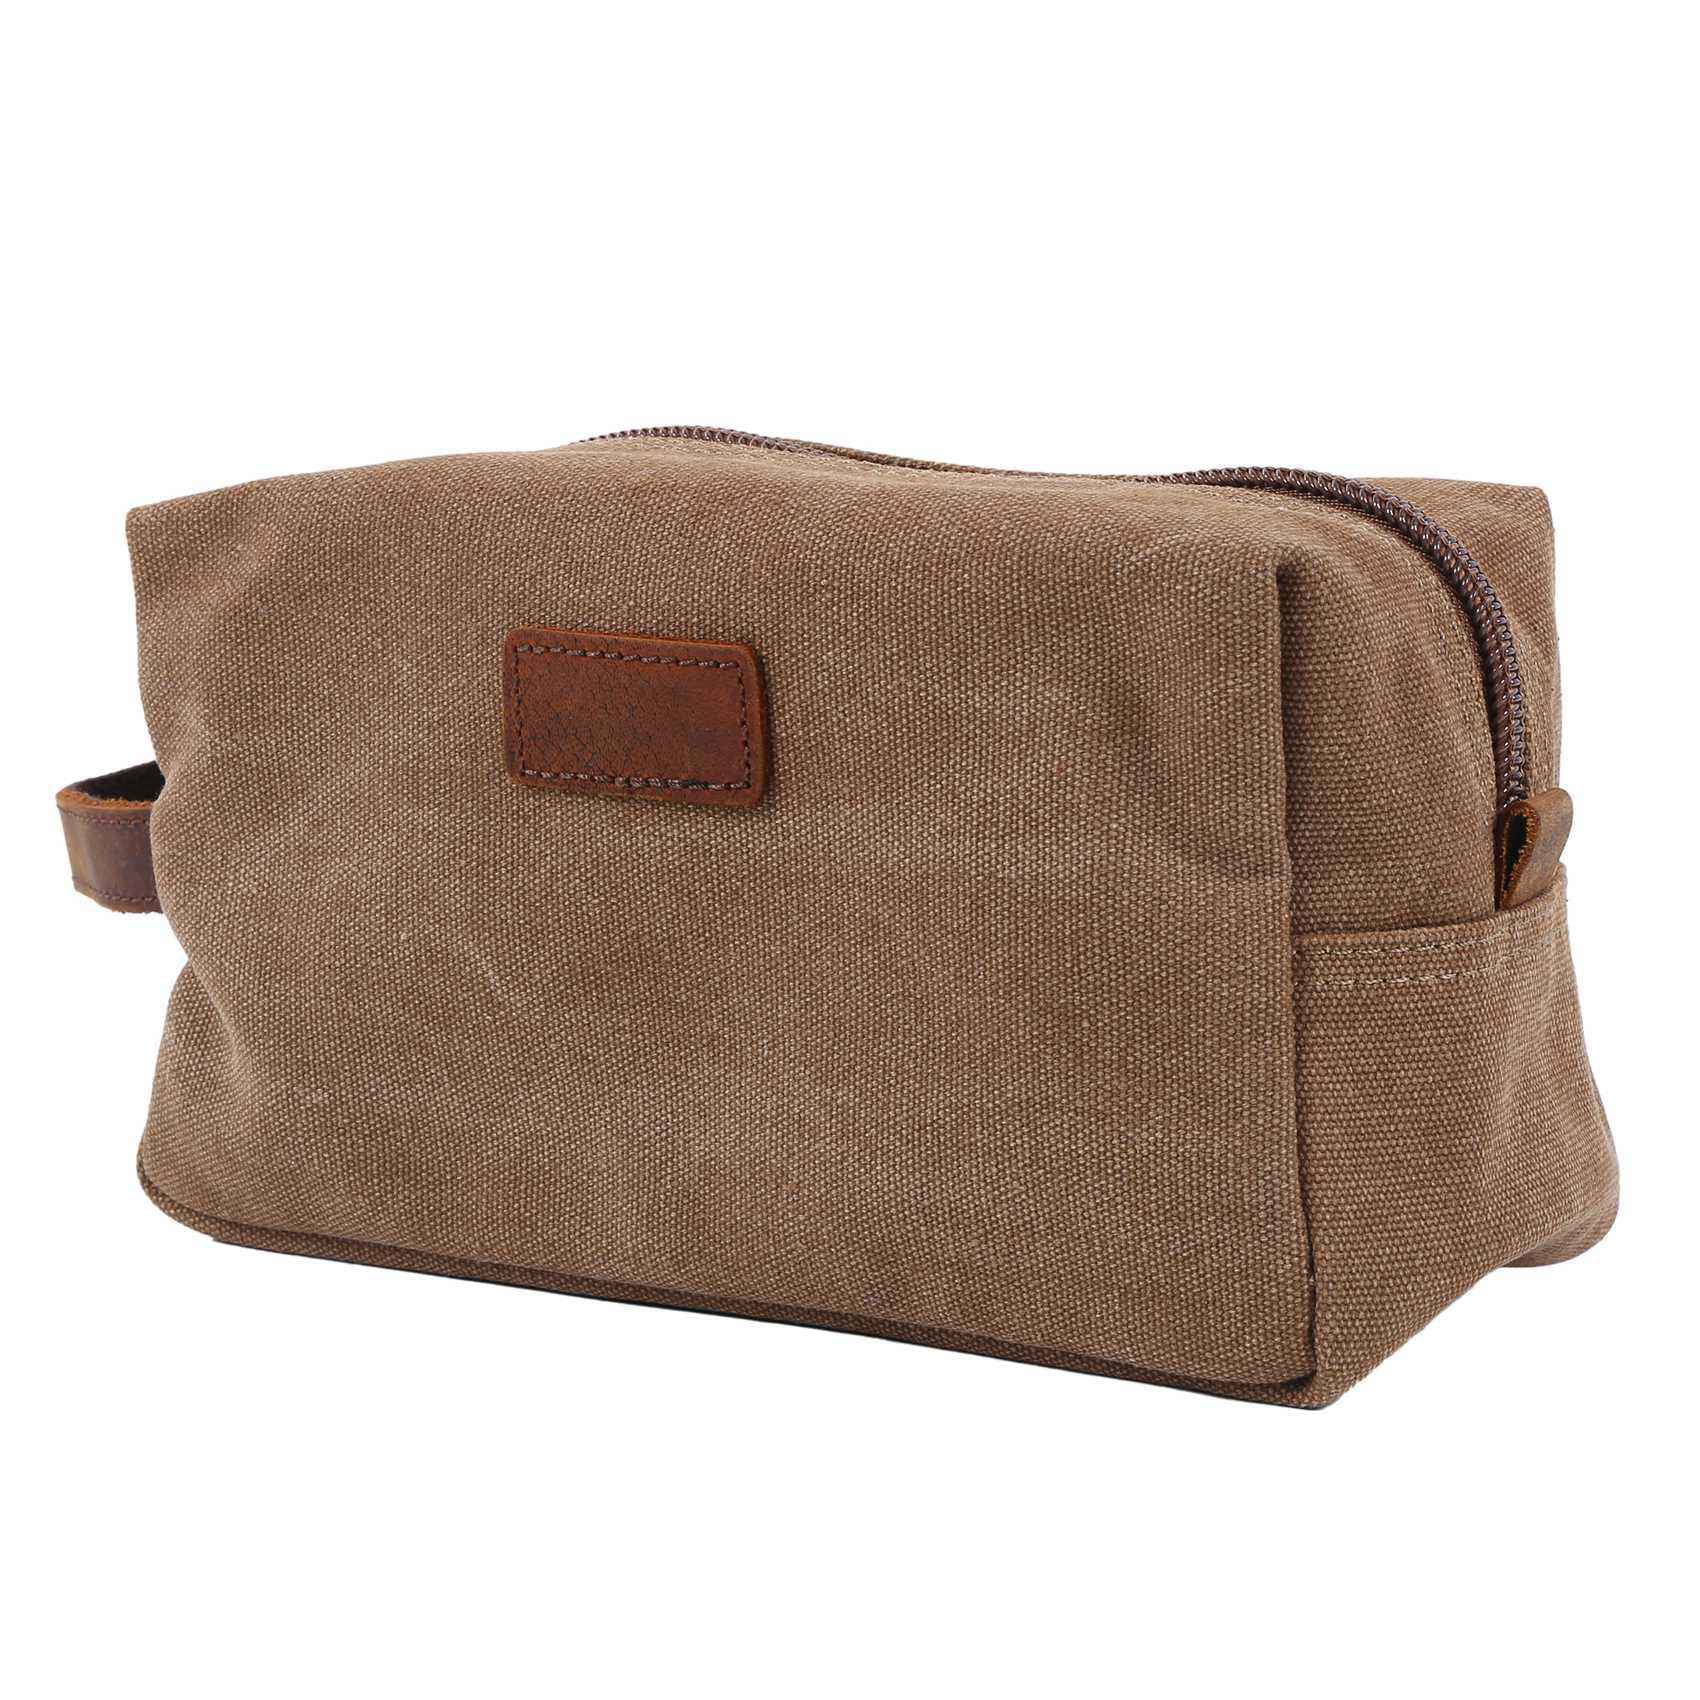 Check Canvas Toiletry Bag Luisaviaroma Men Accessories Bags Toiletry Bags 